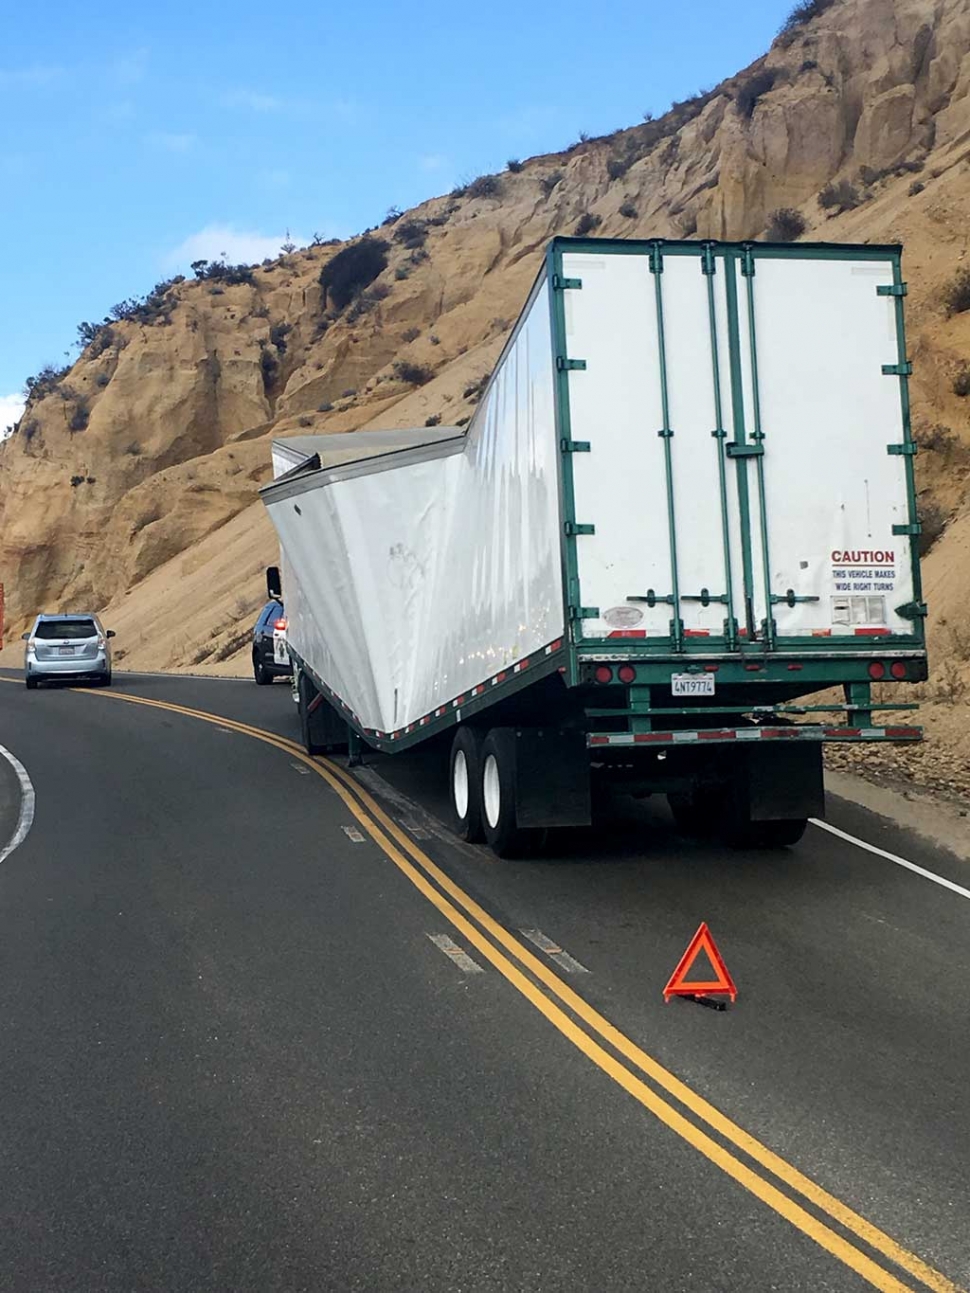 At approximately 12:45 PM the CHP’s Ventura Communications Center began receiving calls of a “big-rig” blocking traffic lanes, State Route 23 (Grimes Canyon Road), near the rock quarry. CHP Moorpark Area personnel responded and worked to clear a disabled truck/trailer combination from the northbound lane. State Route 23 at this location is a two-lane roadway, one lane in each direction. 